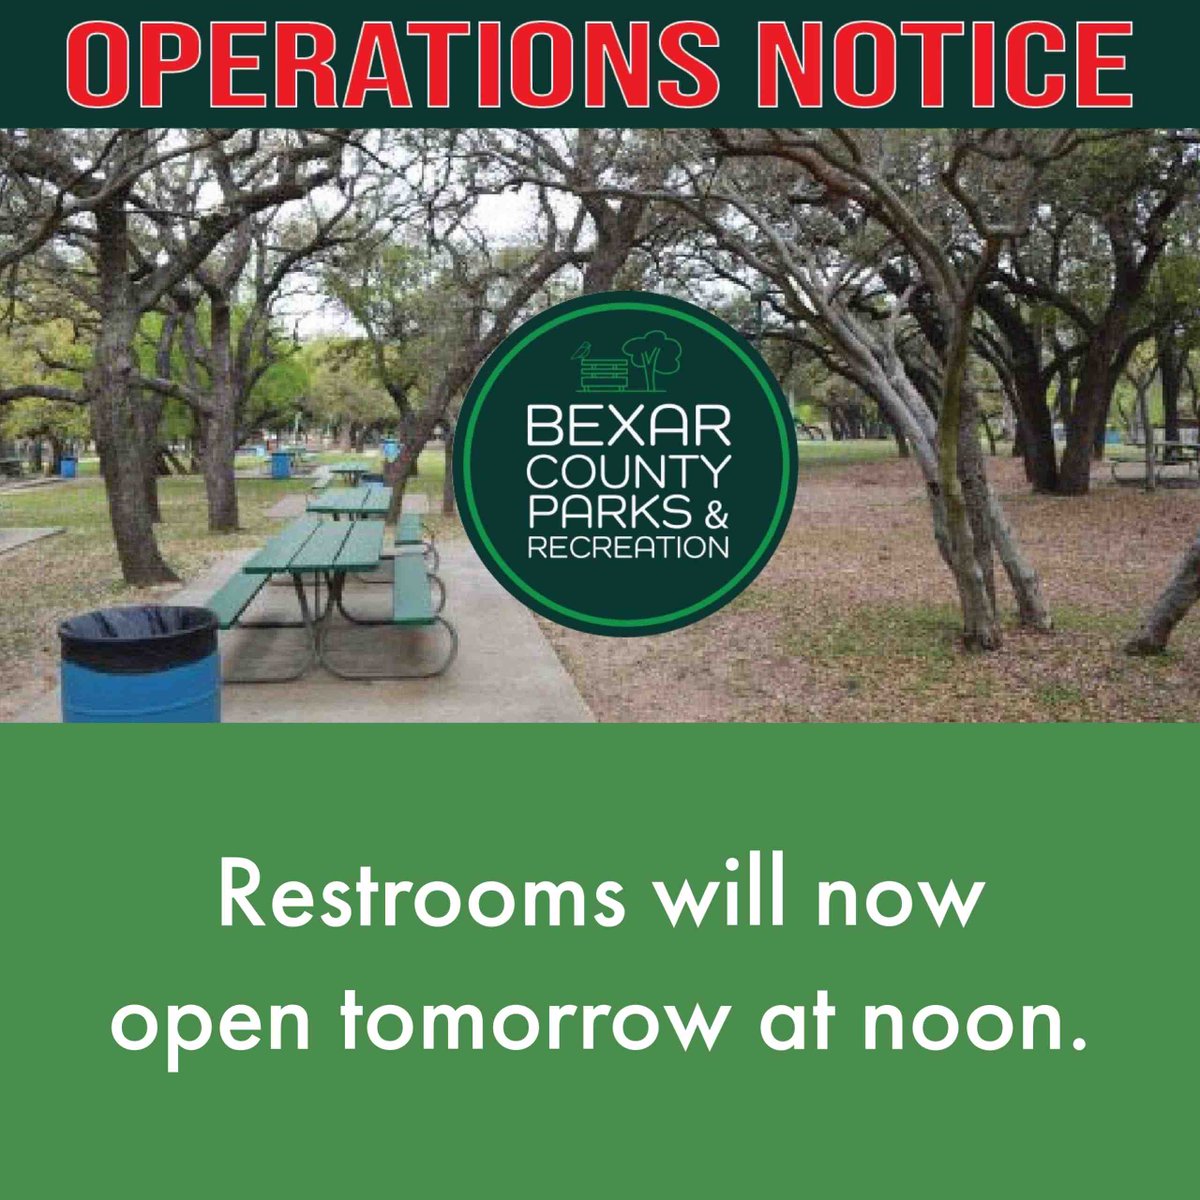 Park restrooms will now open tomorrow at noon. #BexarCounty